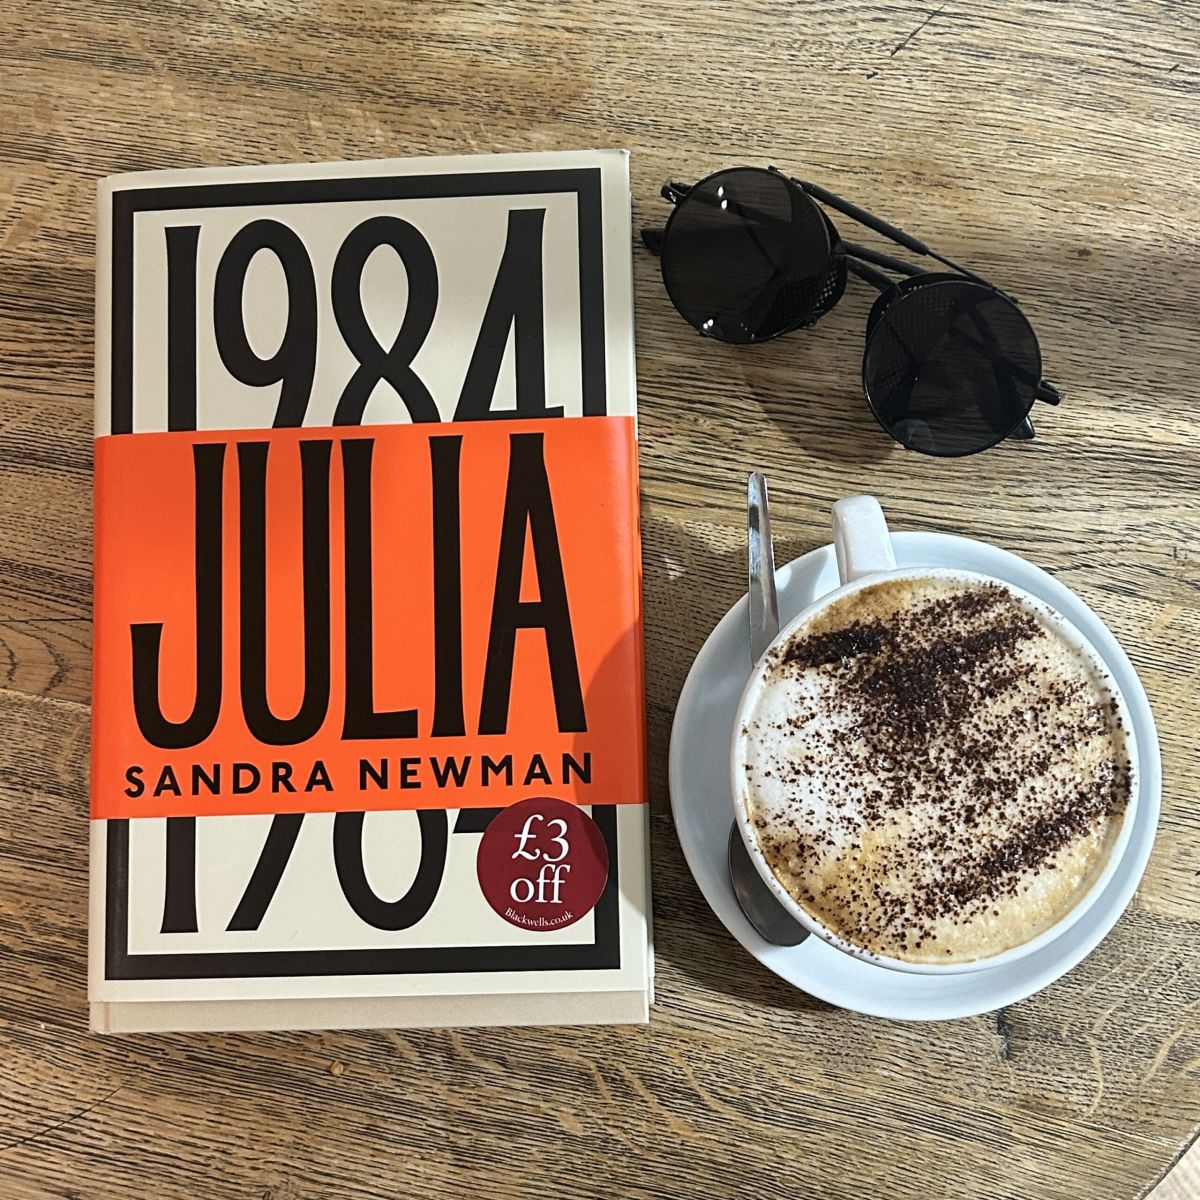 Dystopian hope and the art of feminist retelling: What does Julia hide?